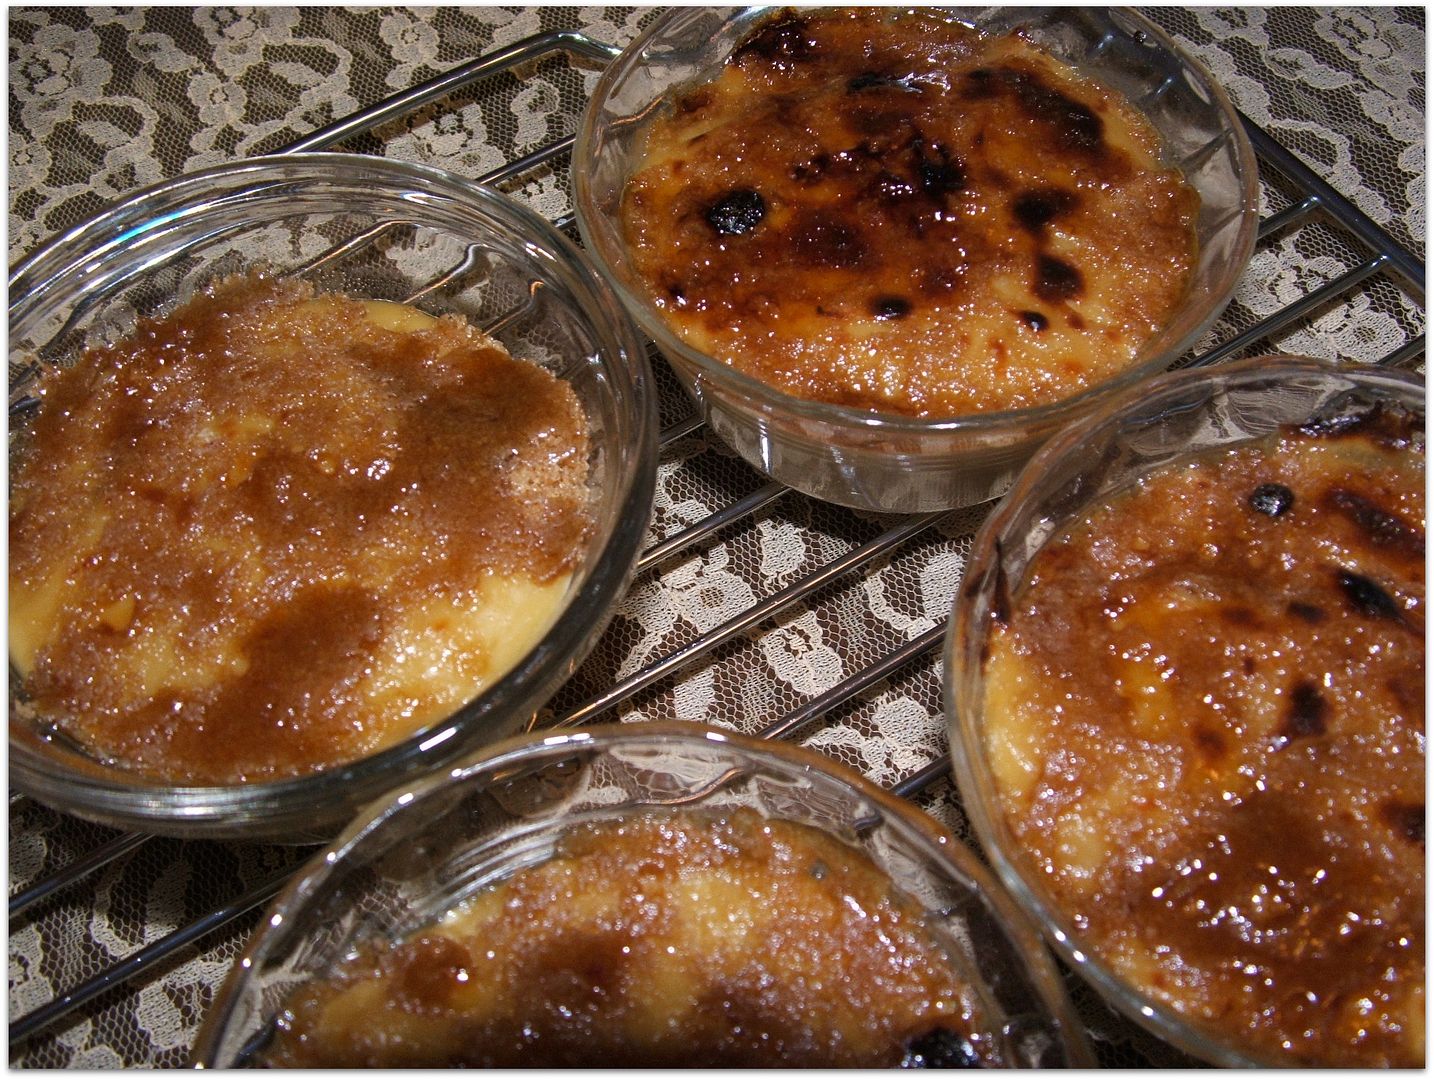 Coffee Creme Brulee by Angie Ouellette-Tower for godsgrowinggarden.com photo 006_zpsd6eea794.jpg